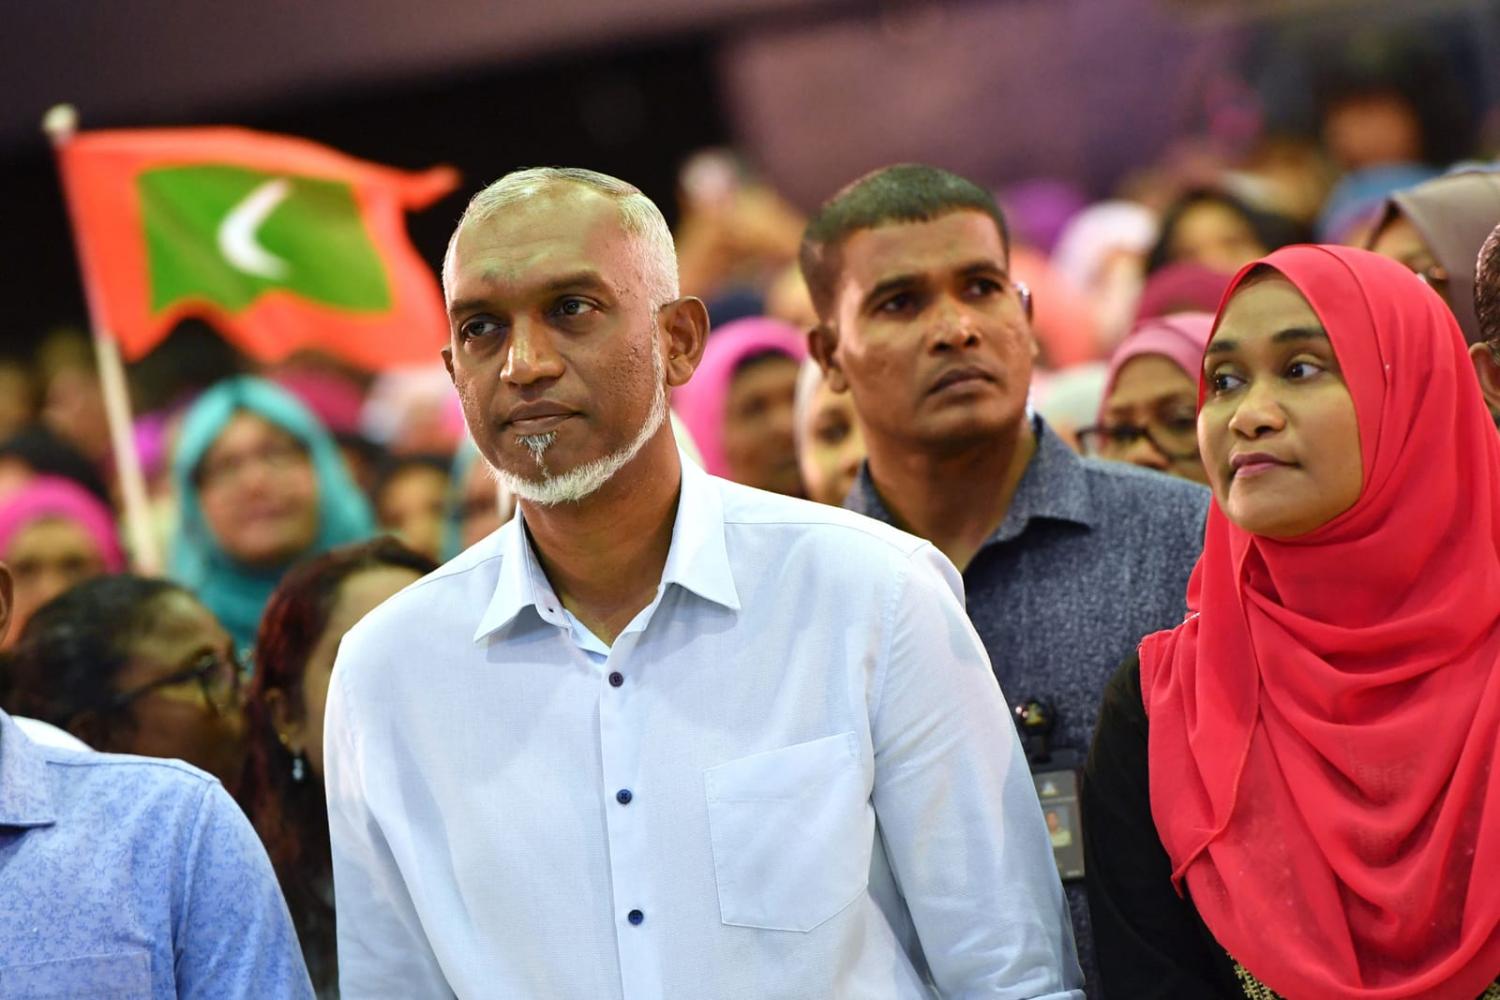 Maldives President-elect Mohamed Muizzu, left, of the People's National Congress (PNC) party, played the “India Out” card early in the campaign (Mohamed Afrah/AFP via Getty Images)